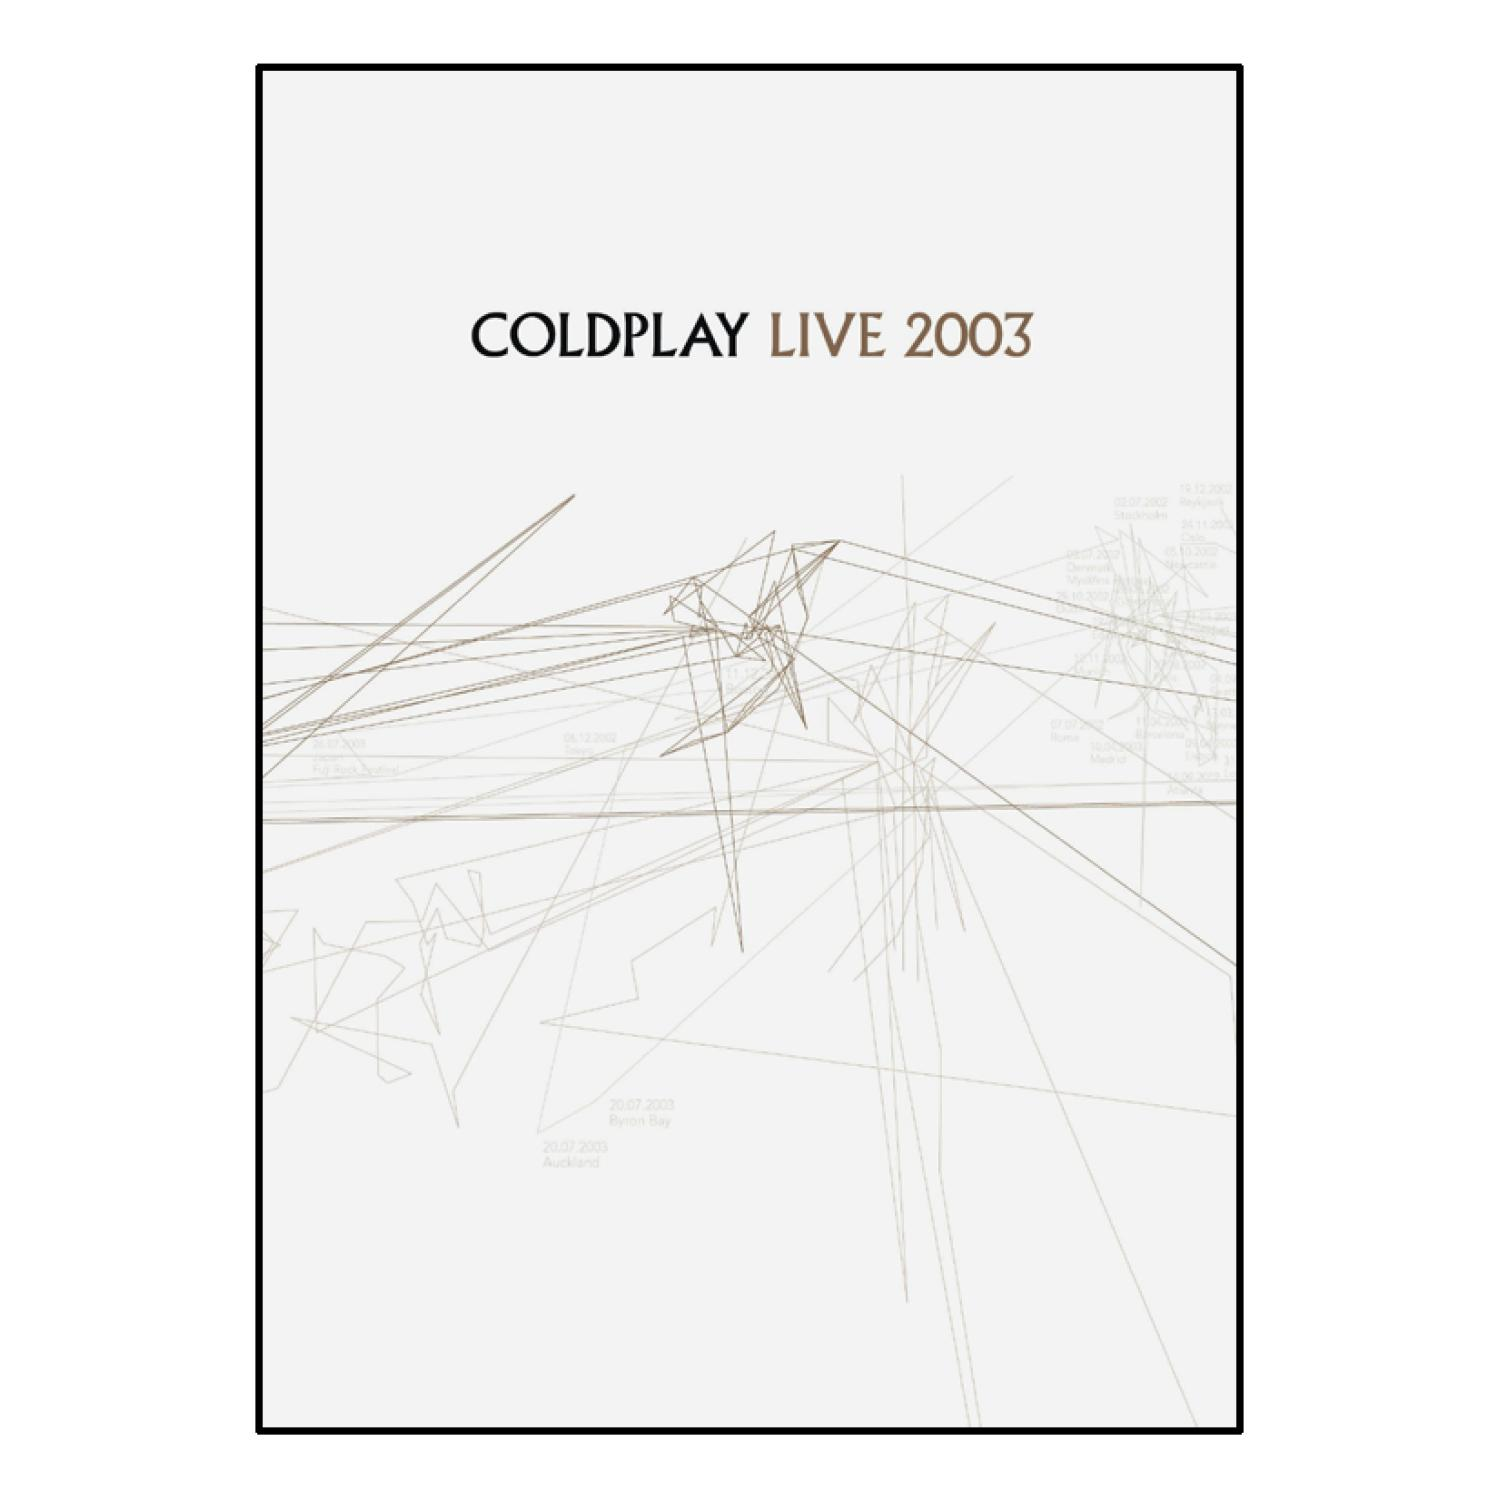 Coldplay - Live (DVD) 2003 